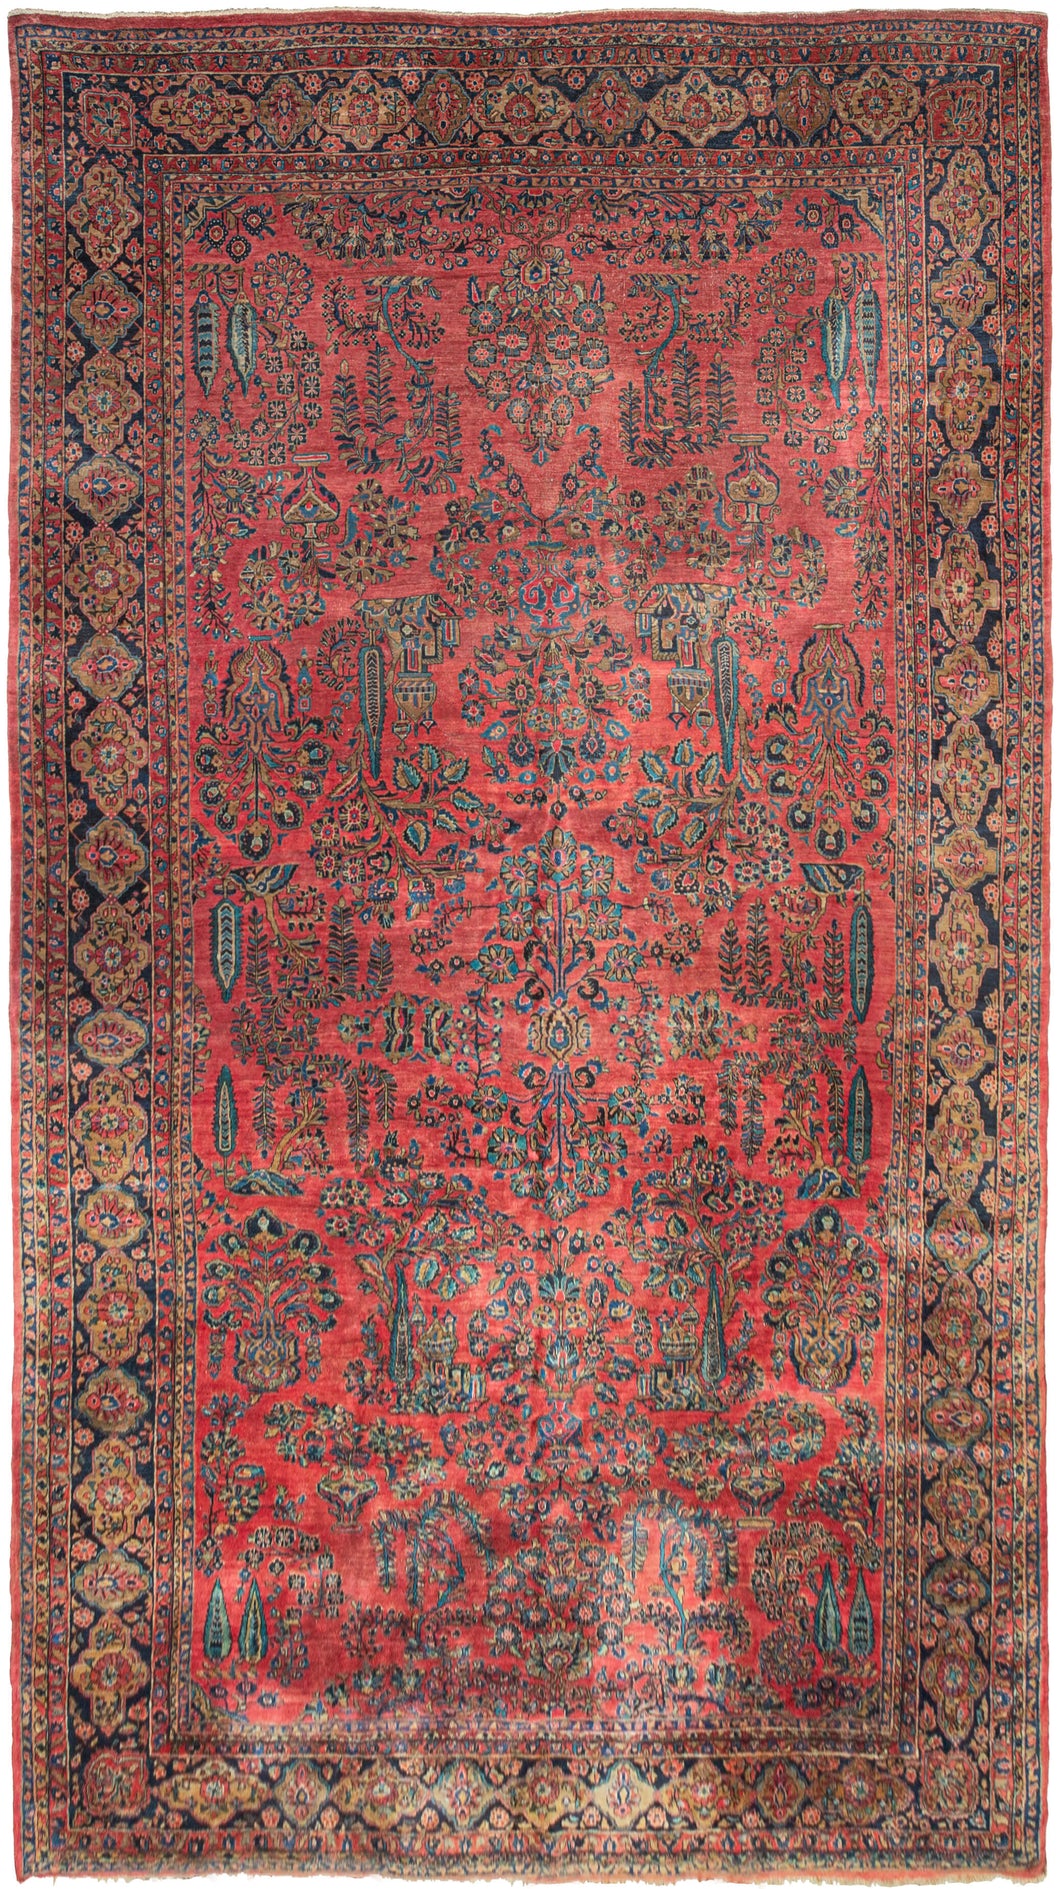 Mohajeran Sarouk was handwoven in Western Iran during the second quarter of the 20th century.   This extra-large rug features a curvilinear floral design of classic floral sprays on a crimson ground. The floral sprays are well-spaced and quite elegant and are placed amongst trees, vases, and even architectural forms. Plush and well-executed these best of type Sarouks are referred to as 